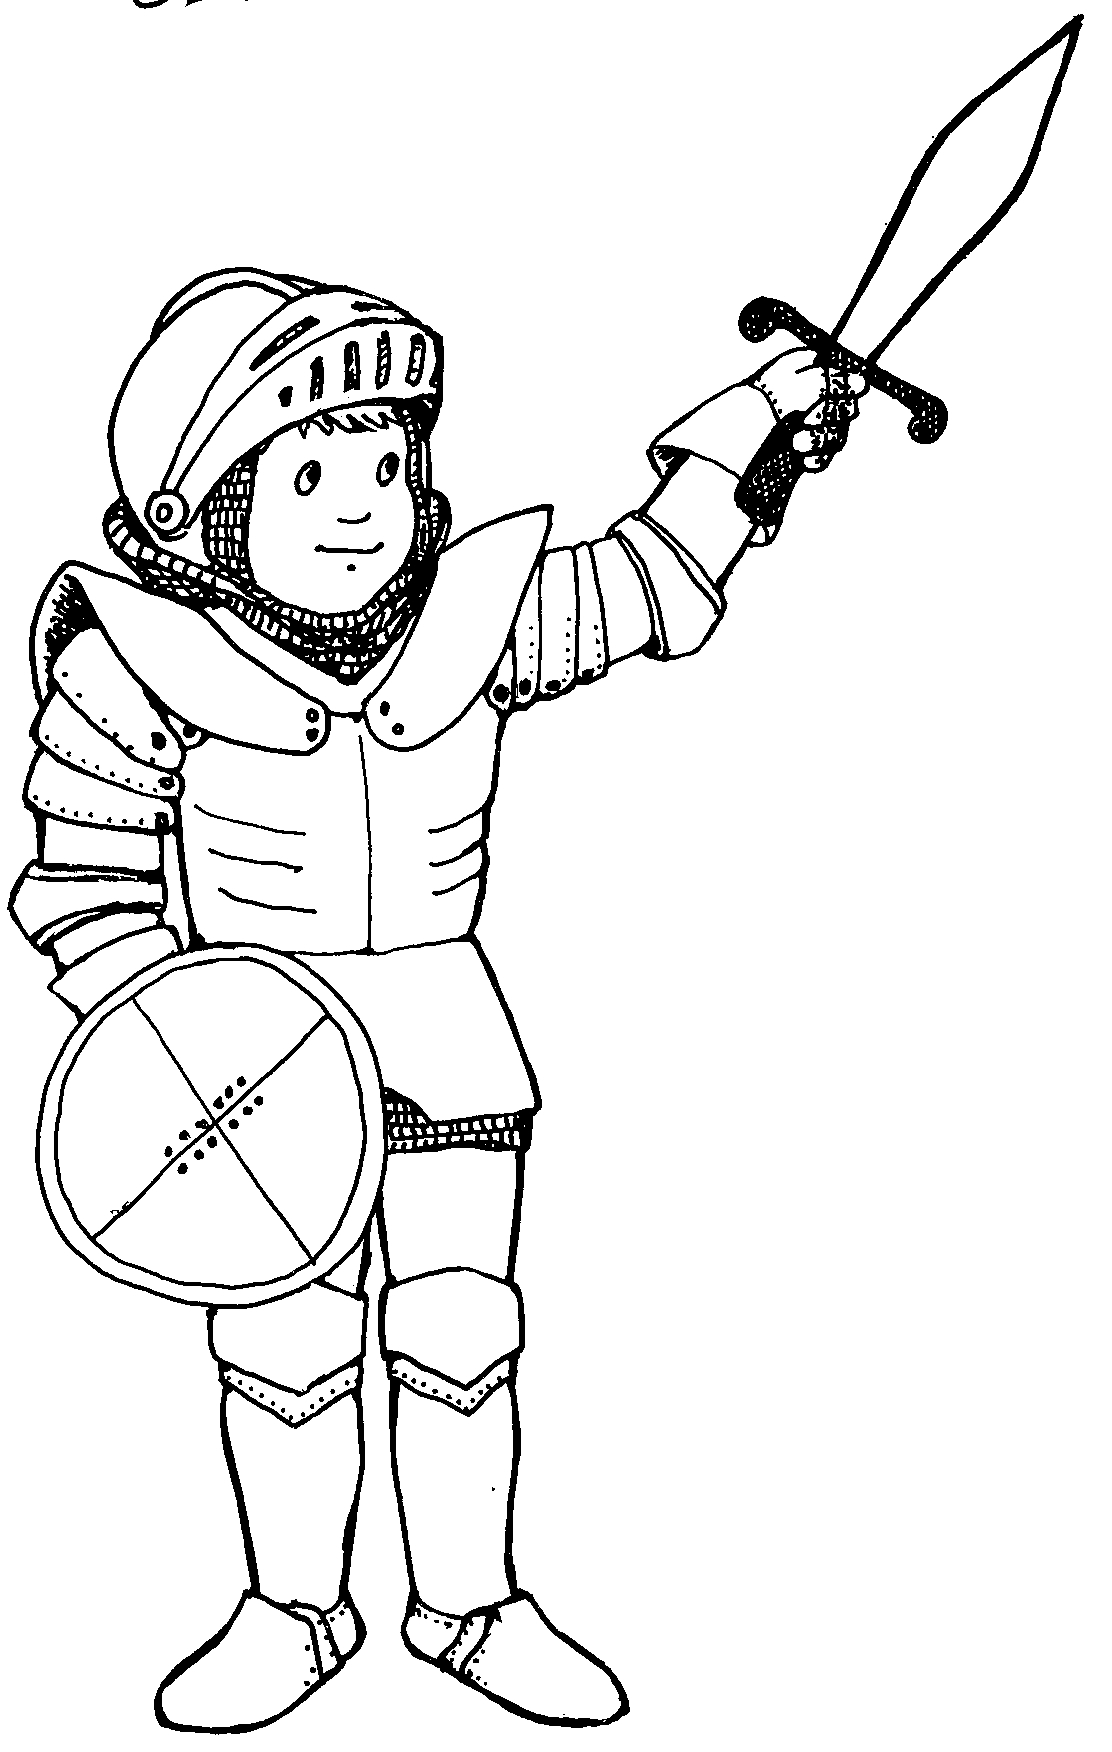 knight clipart black and white